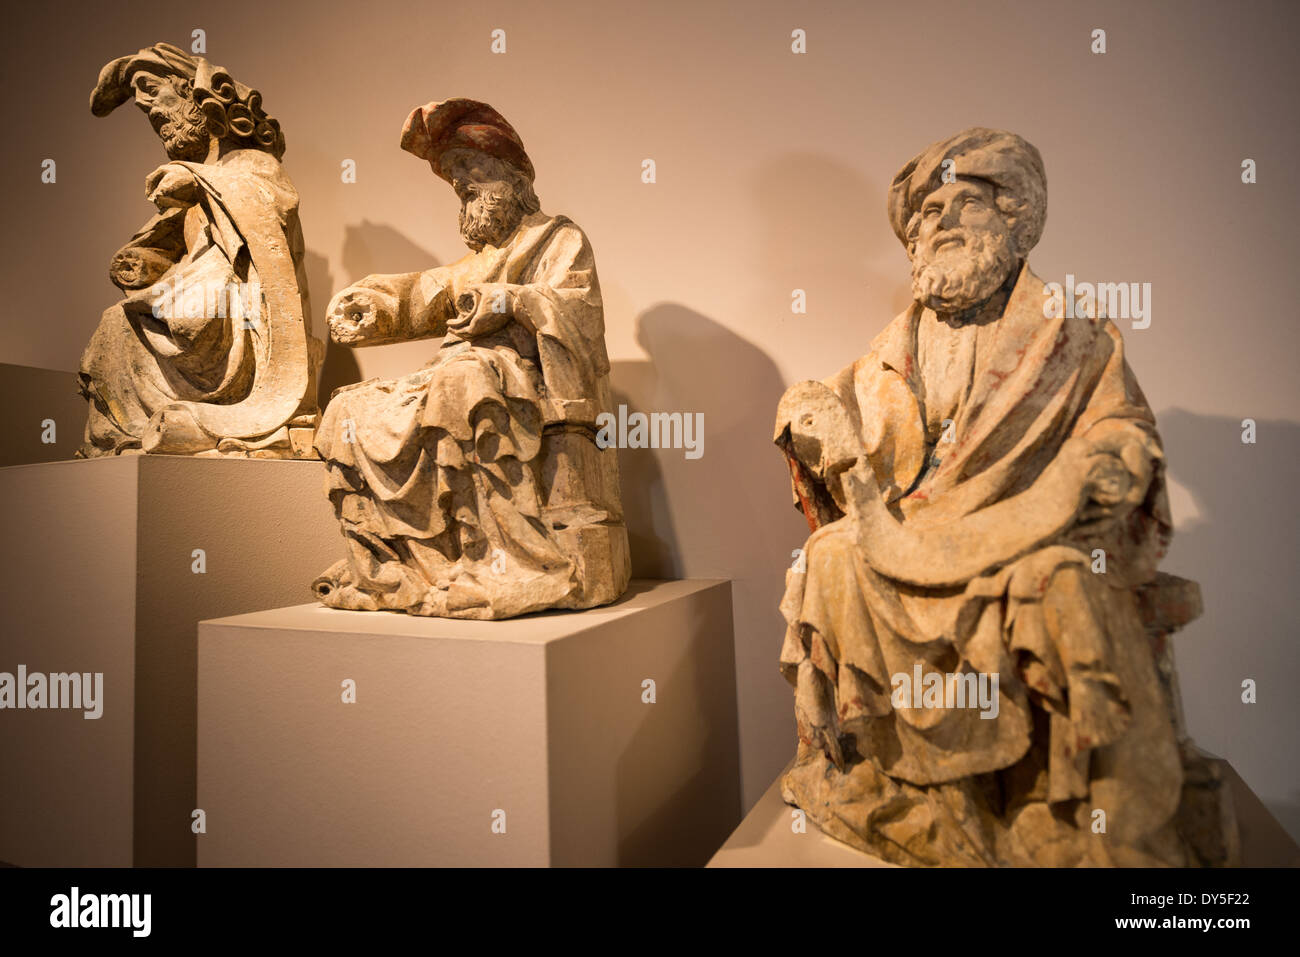 Historic statues on display at the Museum of the City of Brussels. The museum is dedicated to the history and folklore of the town of Brussels, its development from its beginnings to today, which it presents through paintings, sculptures, tapistries, engravings, photos and models. Stock Photo